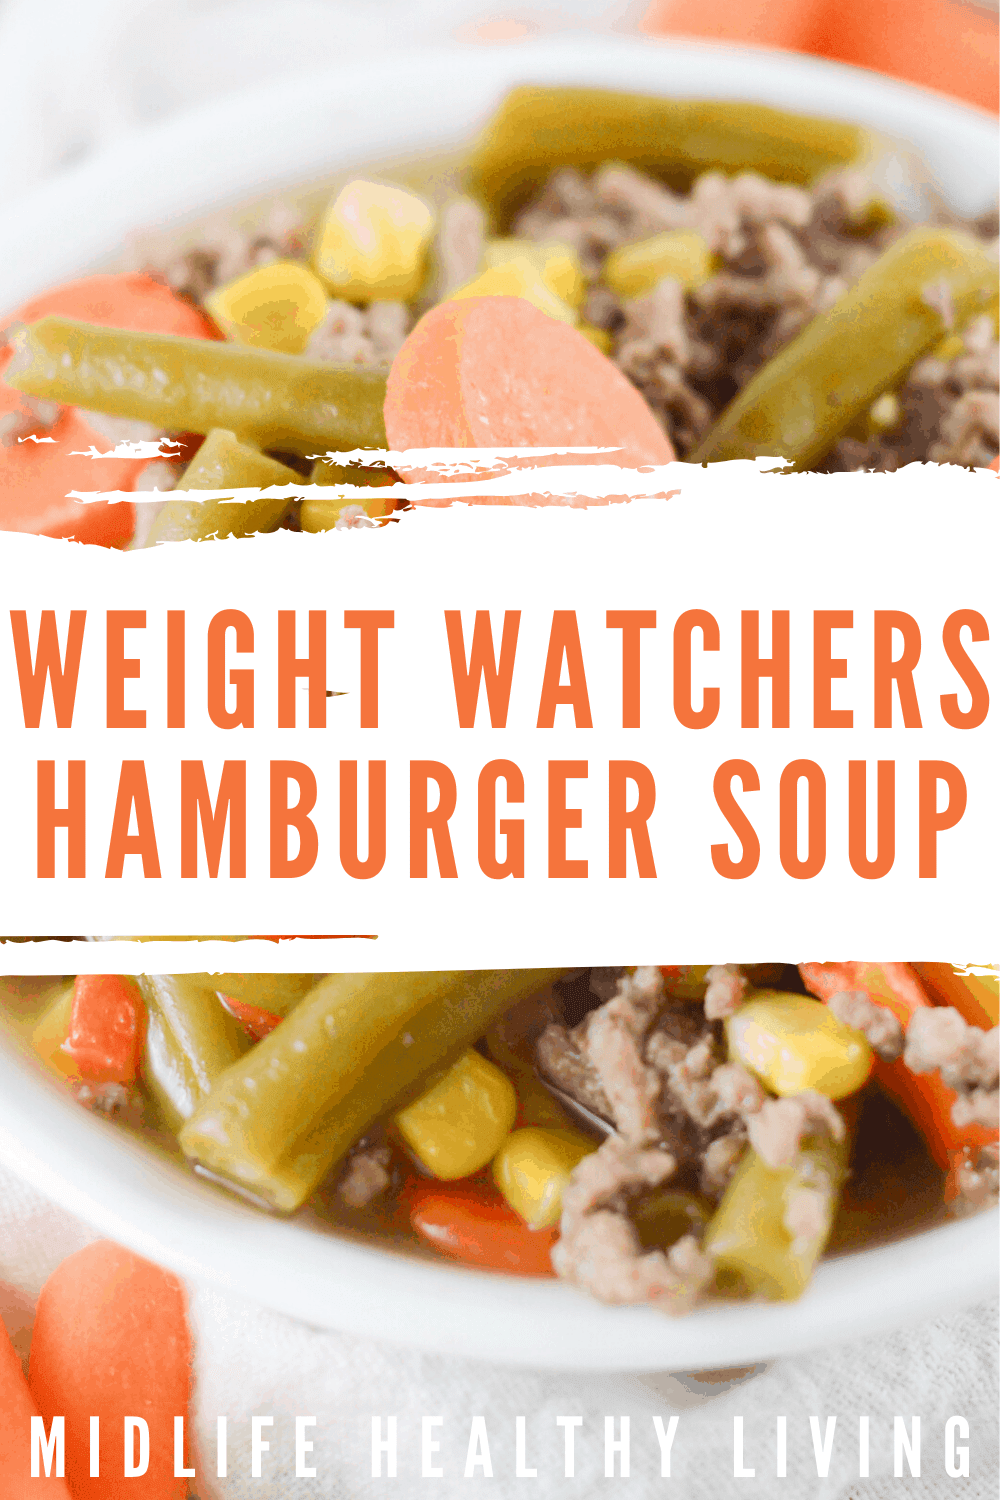 https://www.midlifehealthyliving.com/wp-content/uploads/2020/05/Weight-Watchers-Hamburger-Soup-Pins-1.png.webp